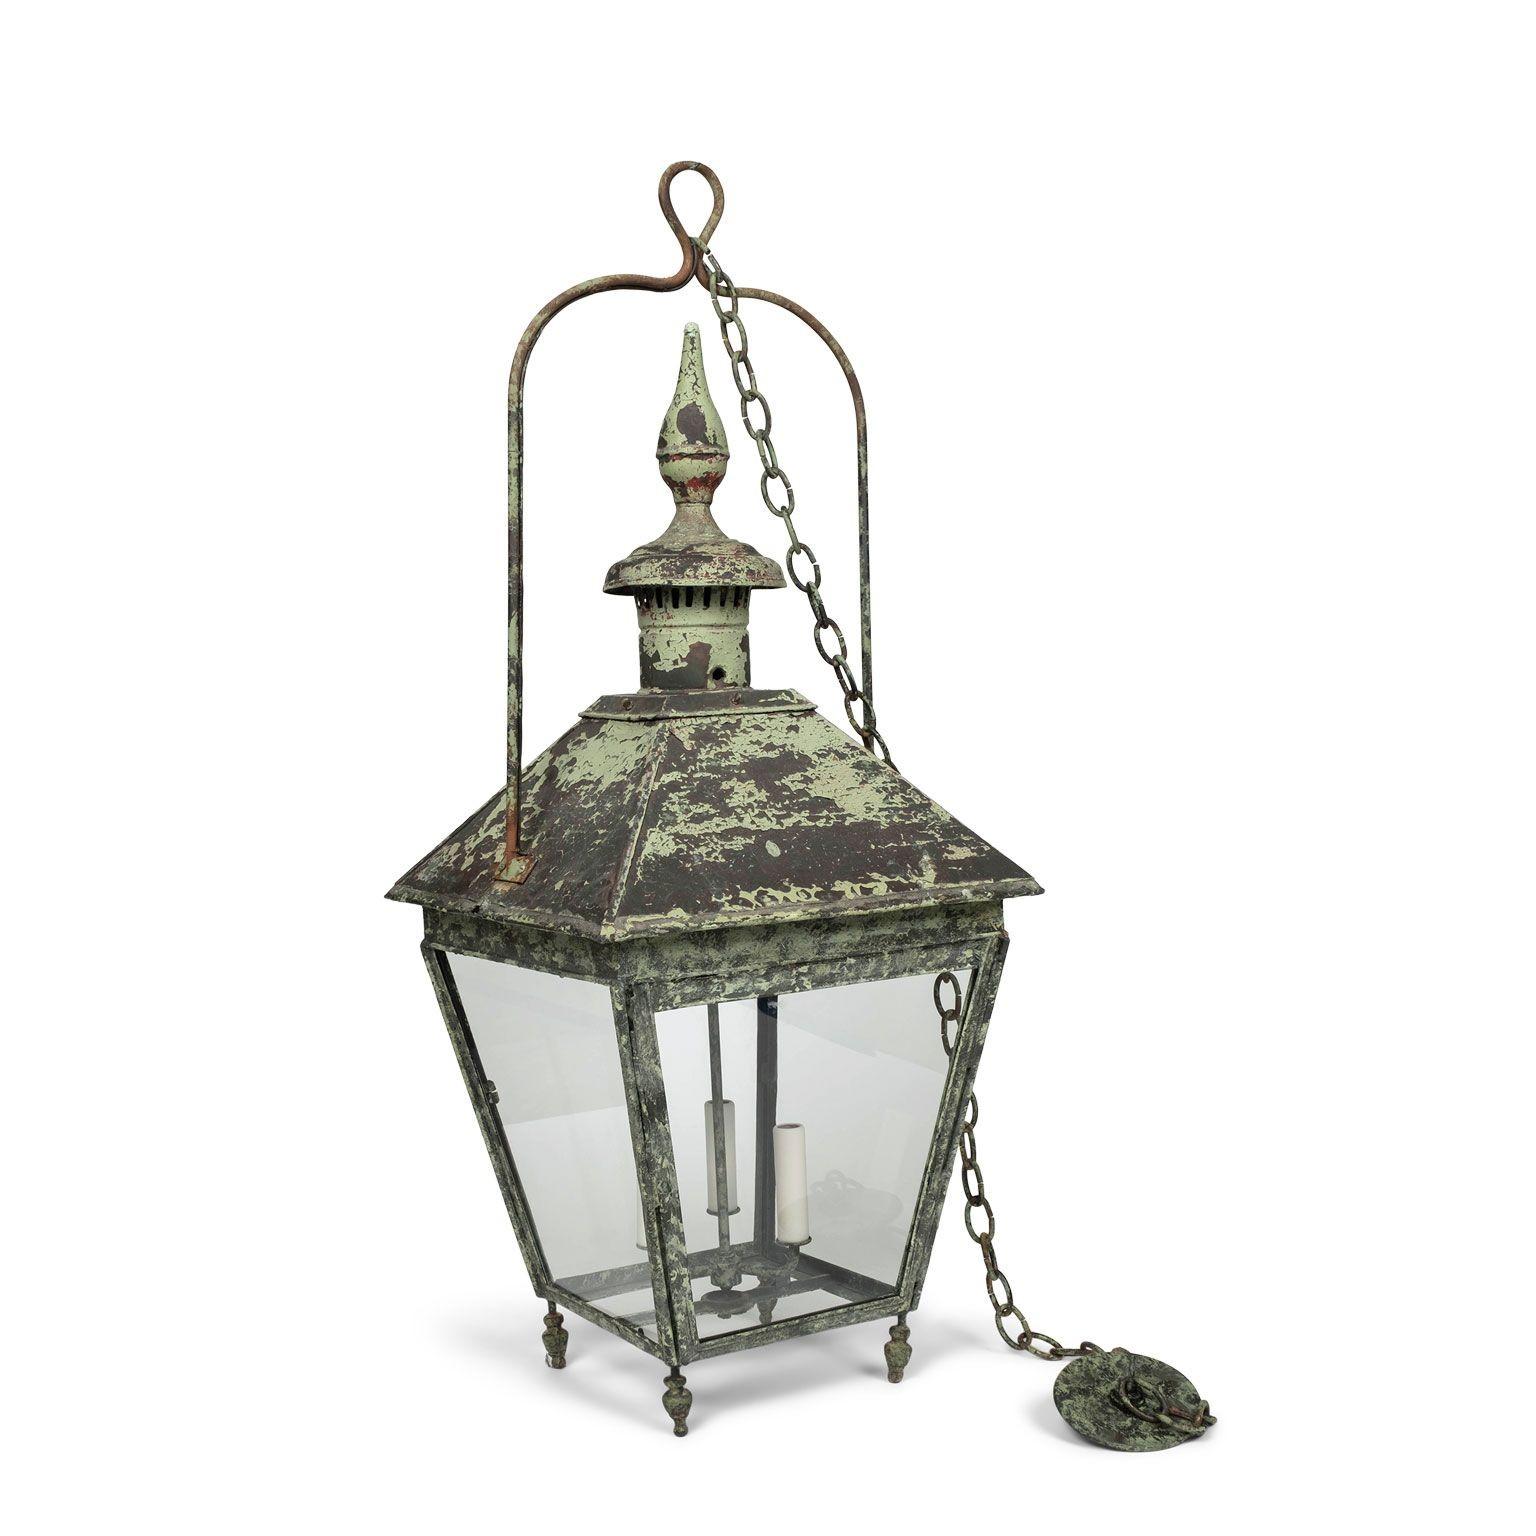 19th Century French Green-Painted Copper and Glass Paneled Lantern For Sale 8